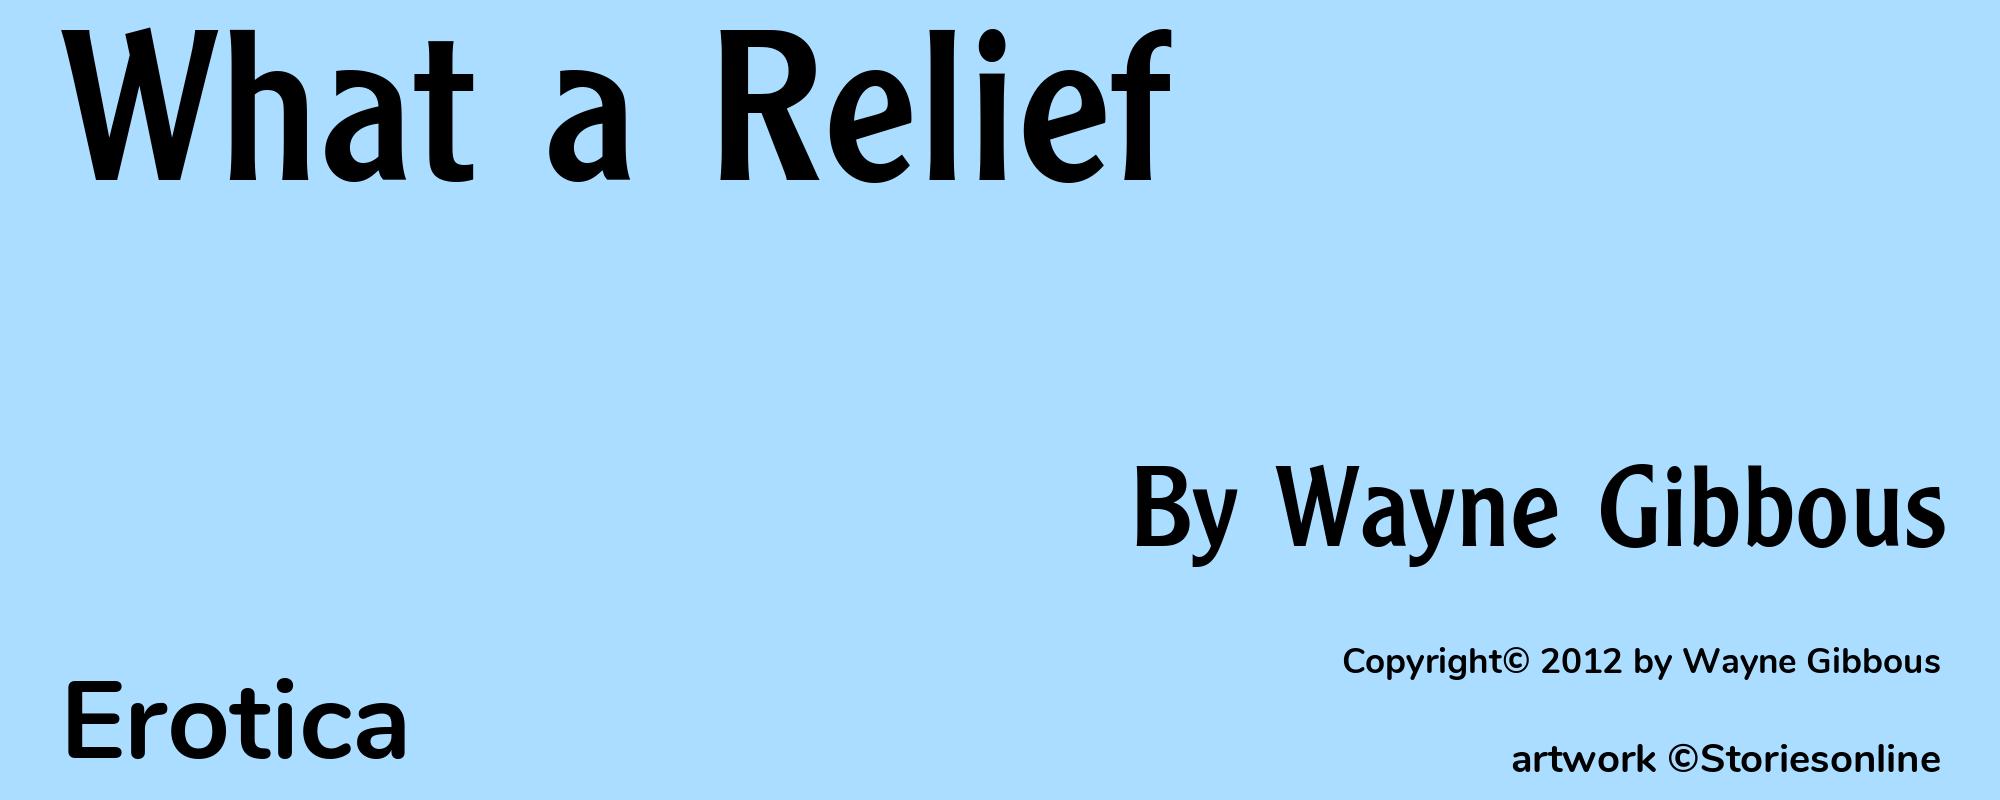 What a Relief - Cover